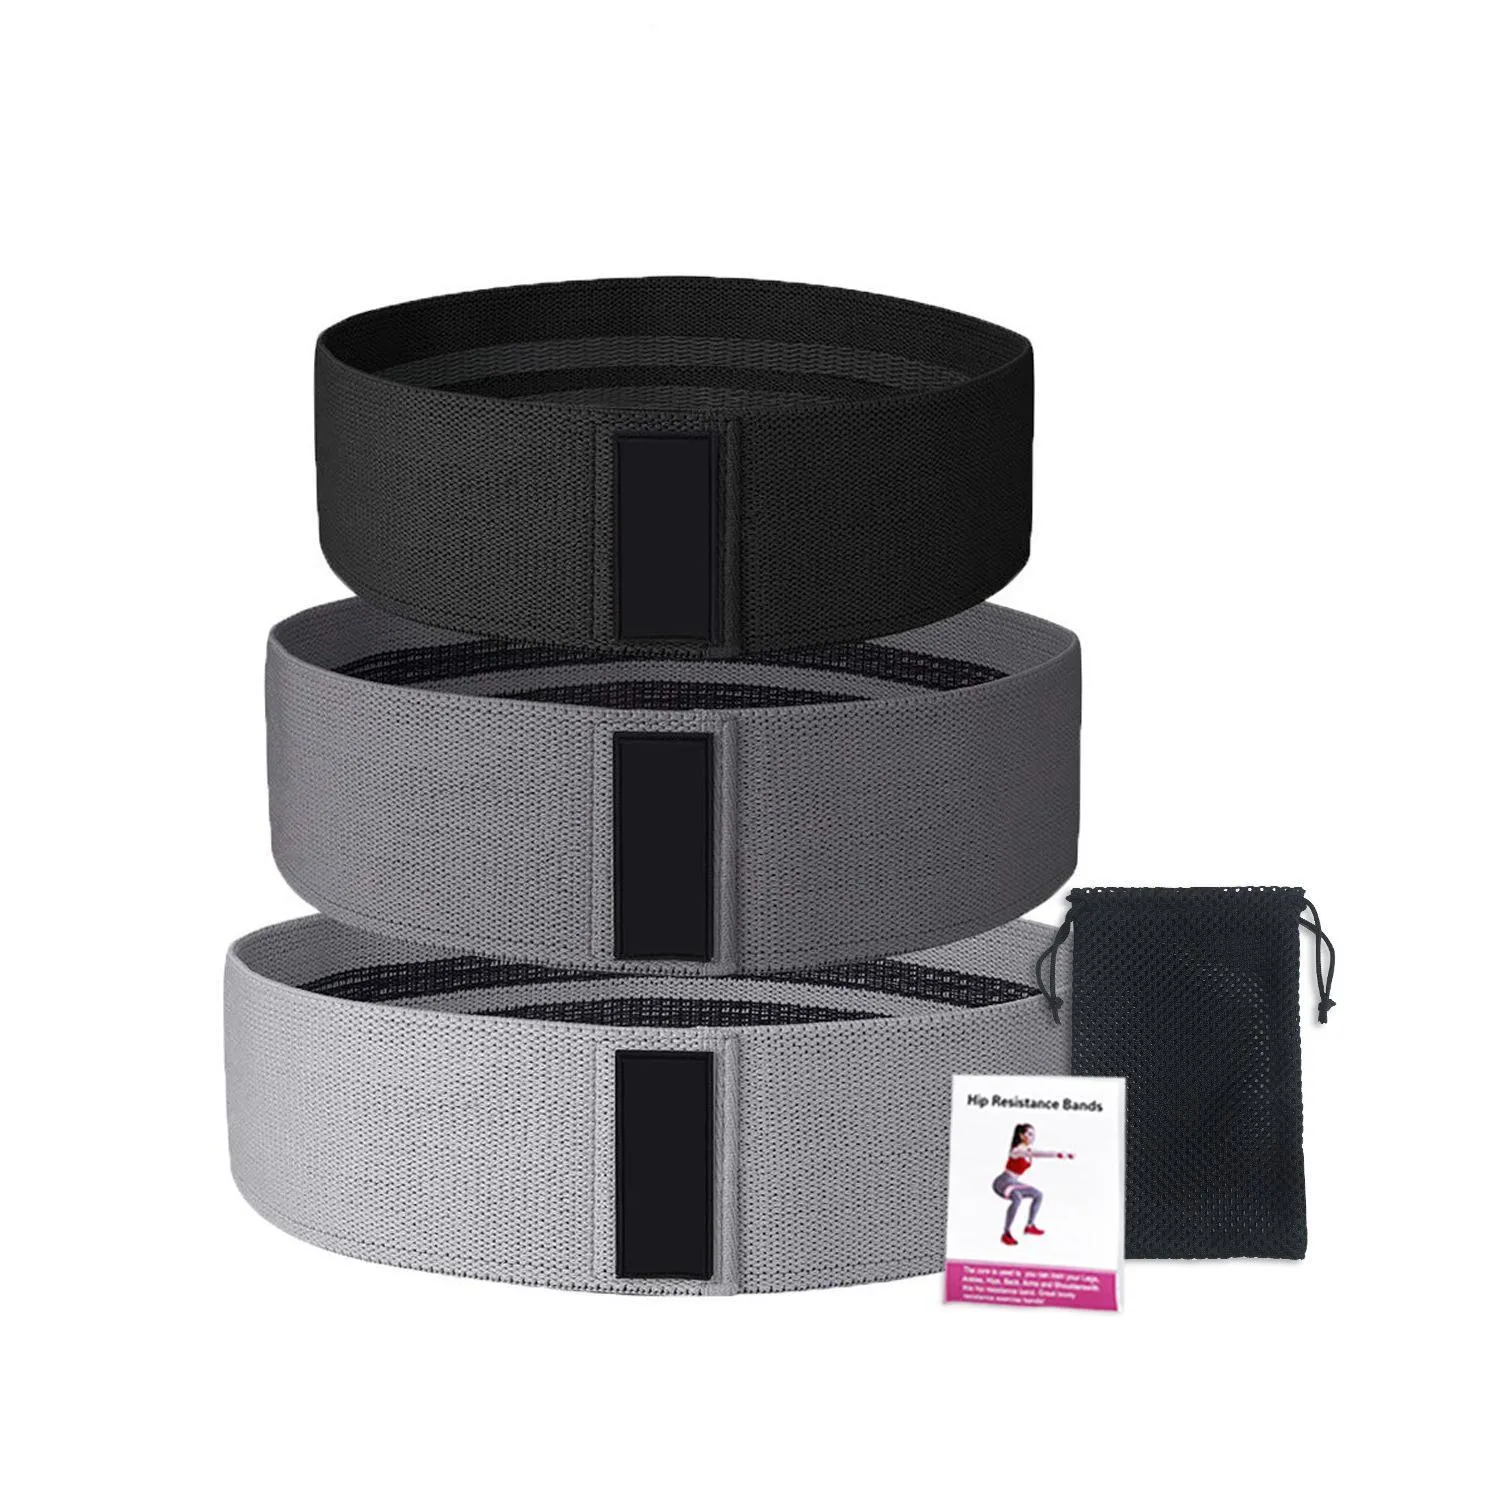 Home & Garden 3pcs /pack Squat Resistance band Exercise Yoga Training Belt Hip Lifting Pull Loop Hip Elastic belt band Exercise Yoga Training Belt Hi